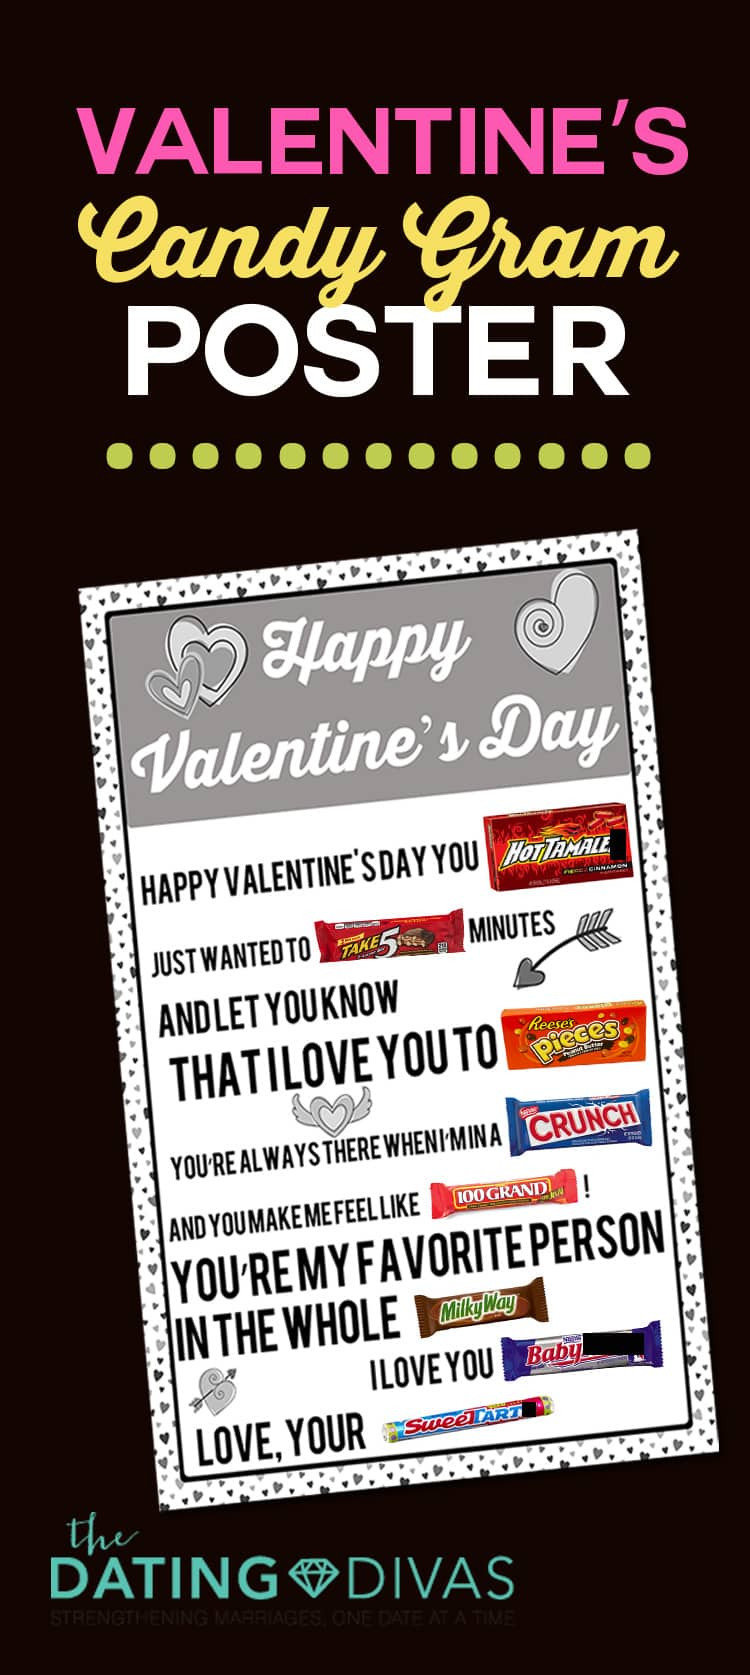 Valentines Day Candy Poster
 Four Printable Candy Posters The Dating Divas